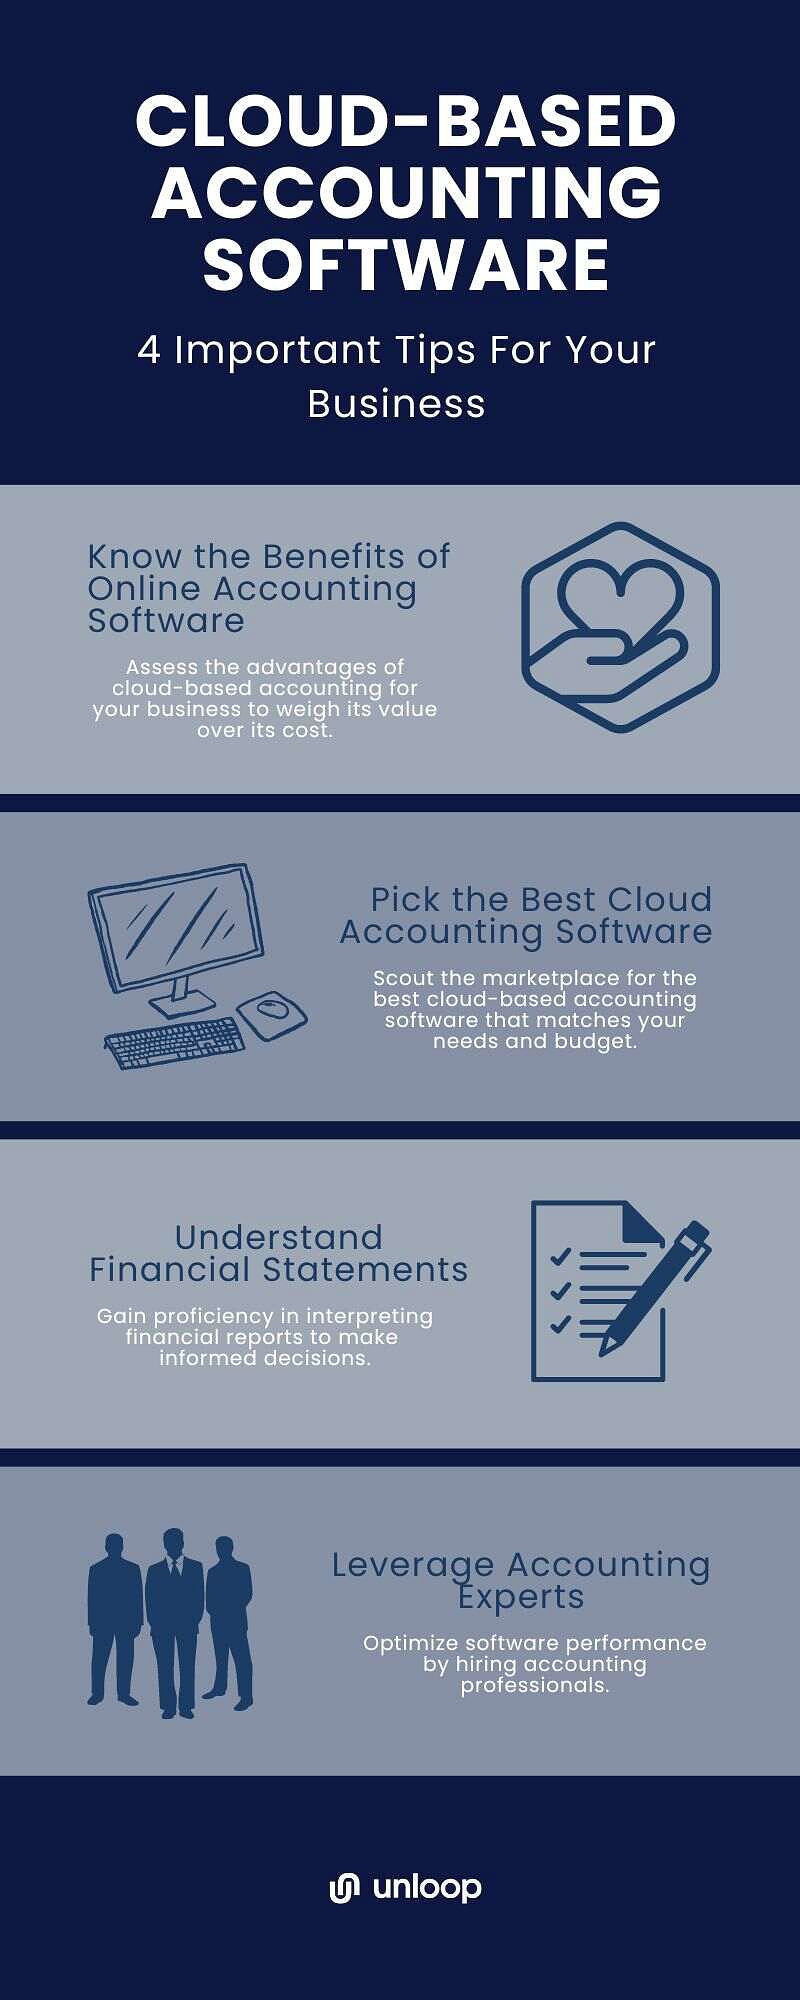 An infographic containing 4 important tips in using cloud-based accounting software